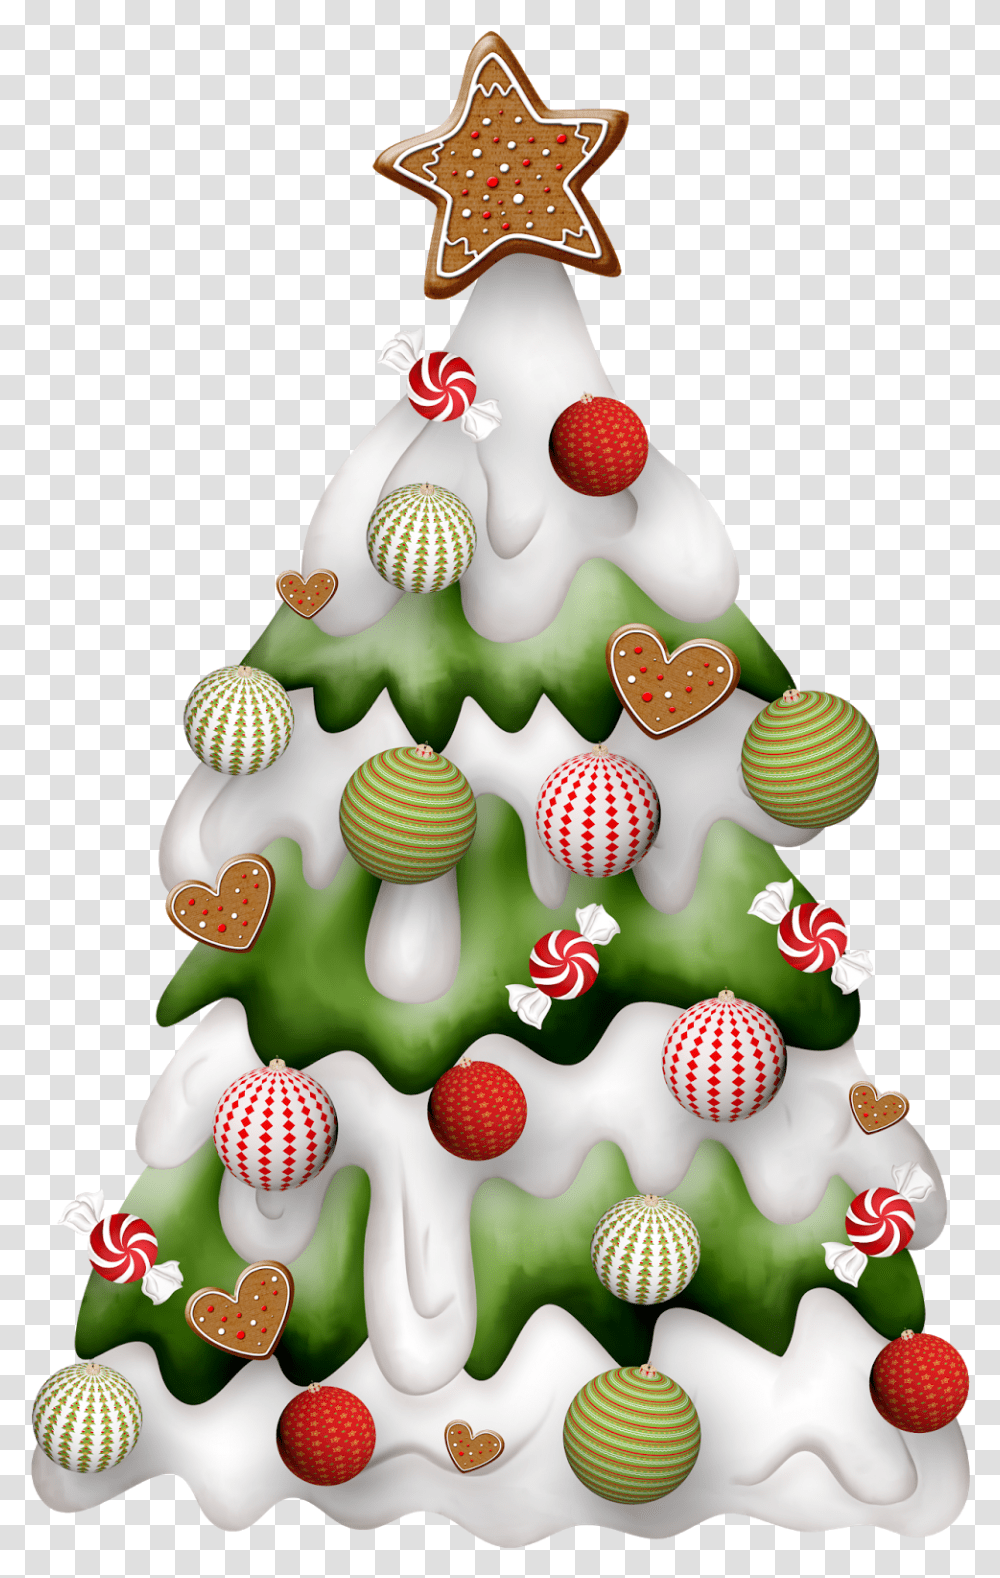 F14a9 Accf0e7f Xl Short Christmas Letters From Santa, Tree, Plant, Birthday Cake, Dessert Transparent Png